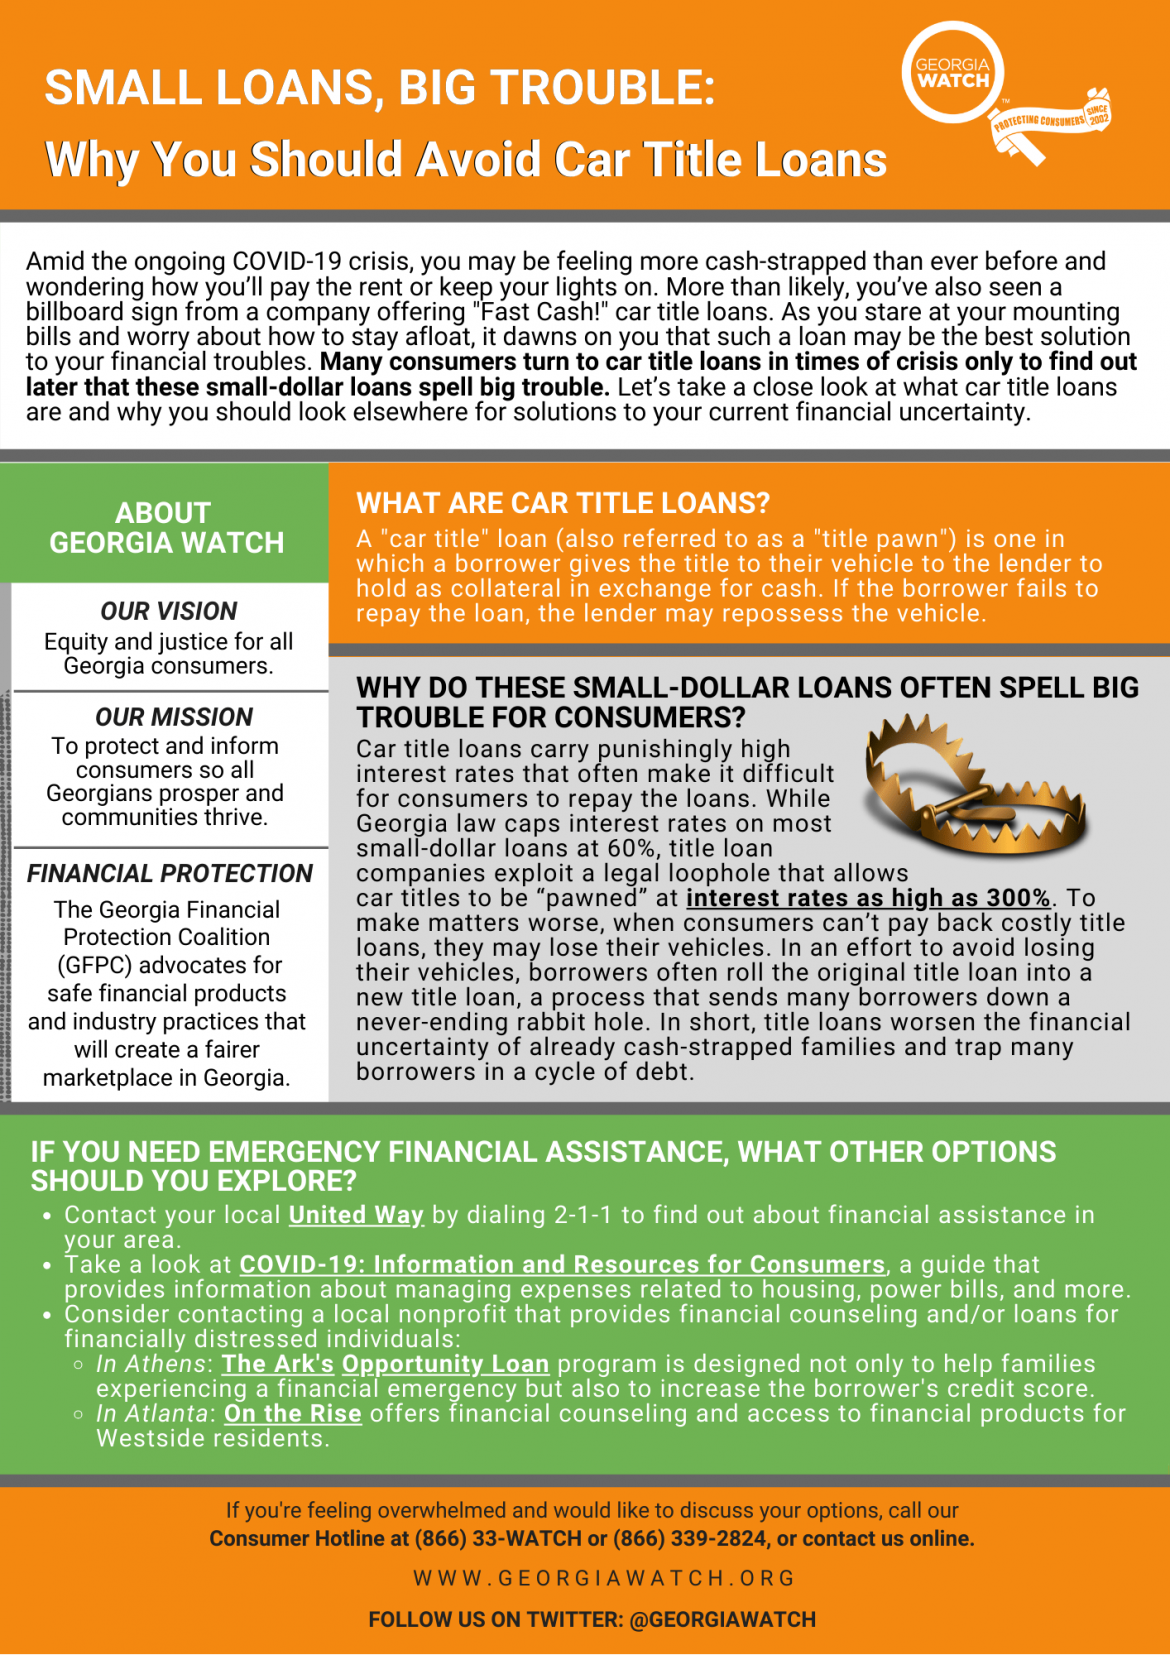 Why-You-Should-Avoid-Car-Title-Loans_Factsheet.png